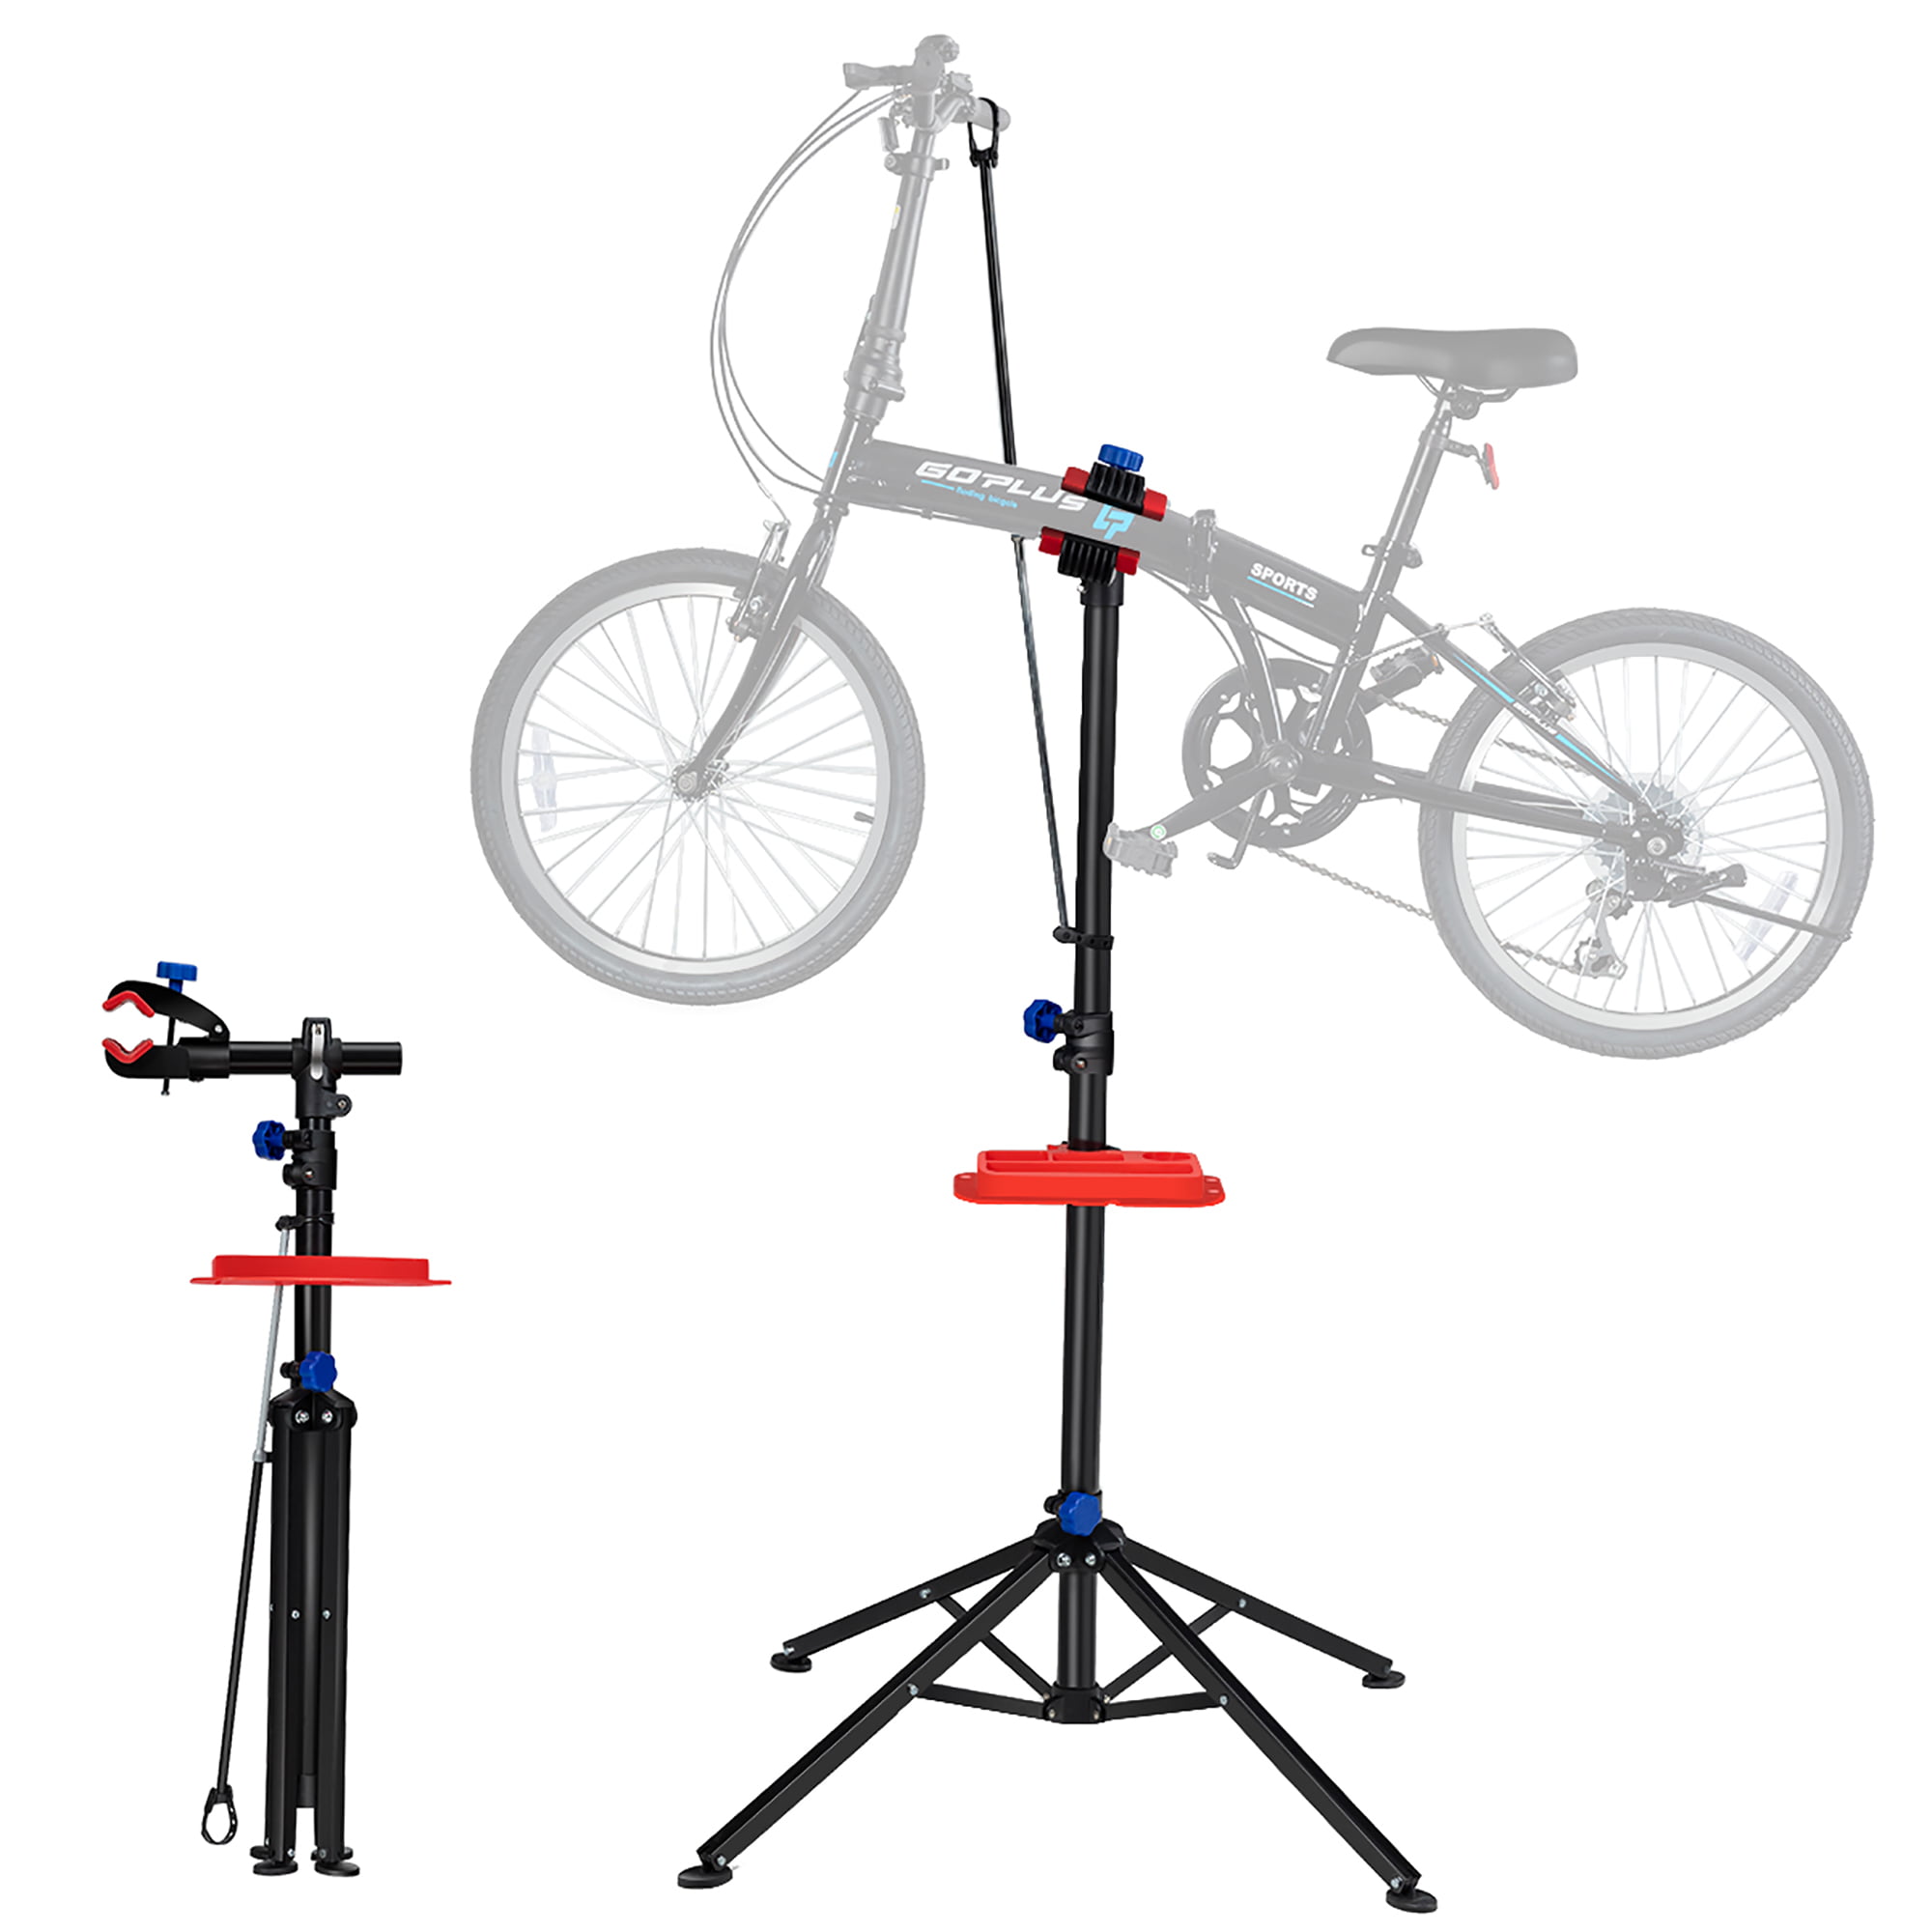 Bike Repair Stand Aluminum Alloy Material Light Weight Foldable Bicycle Repair Rack Workstand Home Portable Bicycle Mechanics Workstand for Mountain Bikes and Road Bikes Maintenance